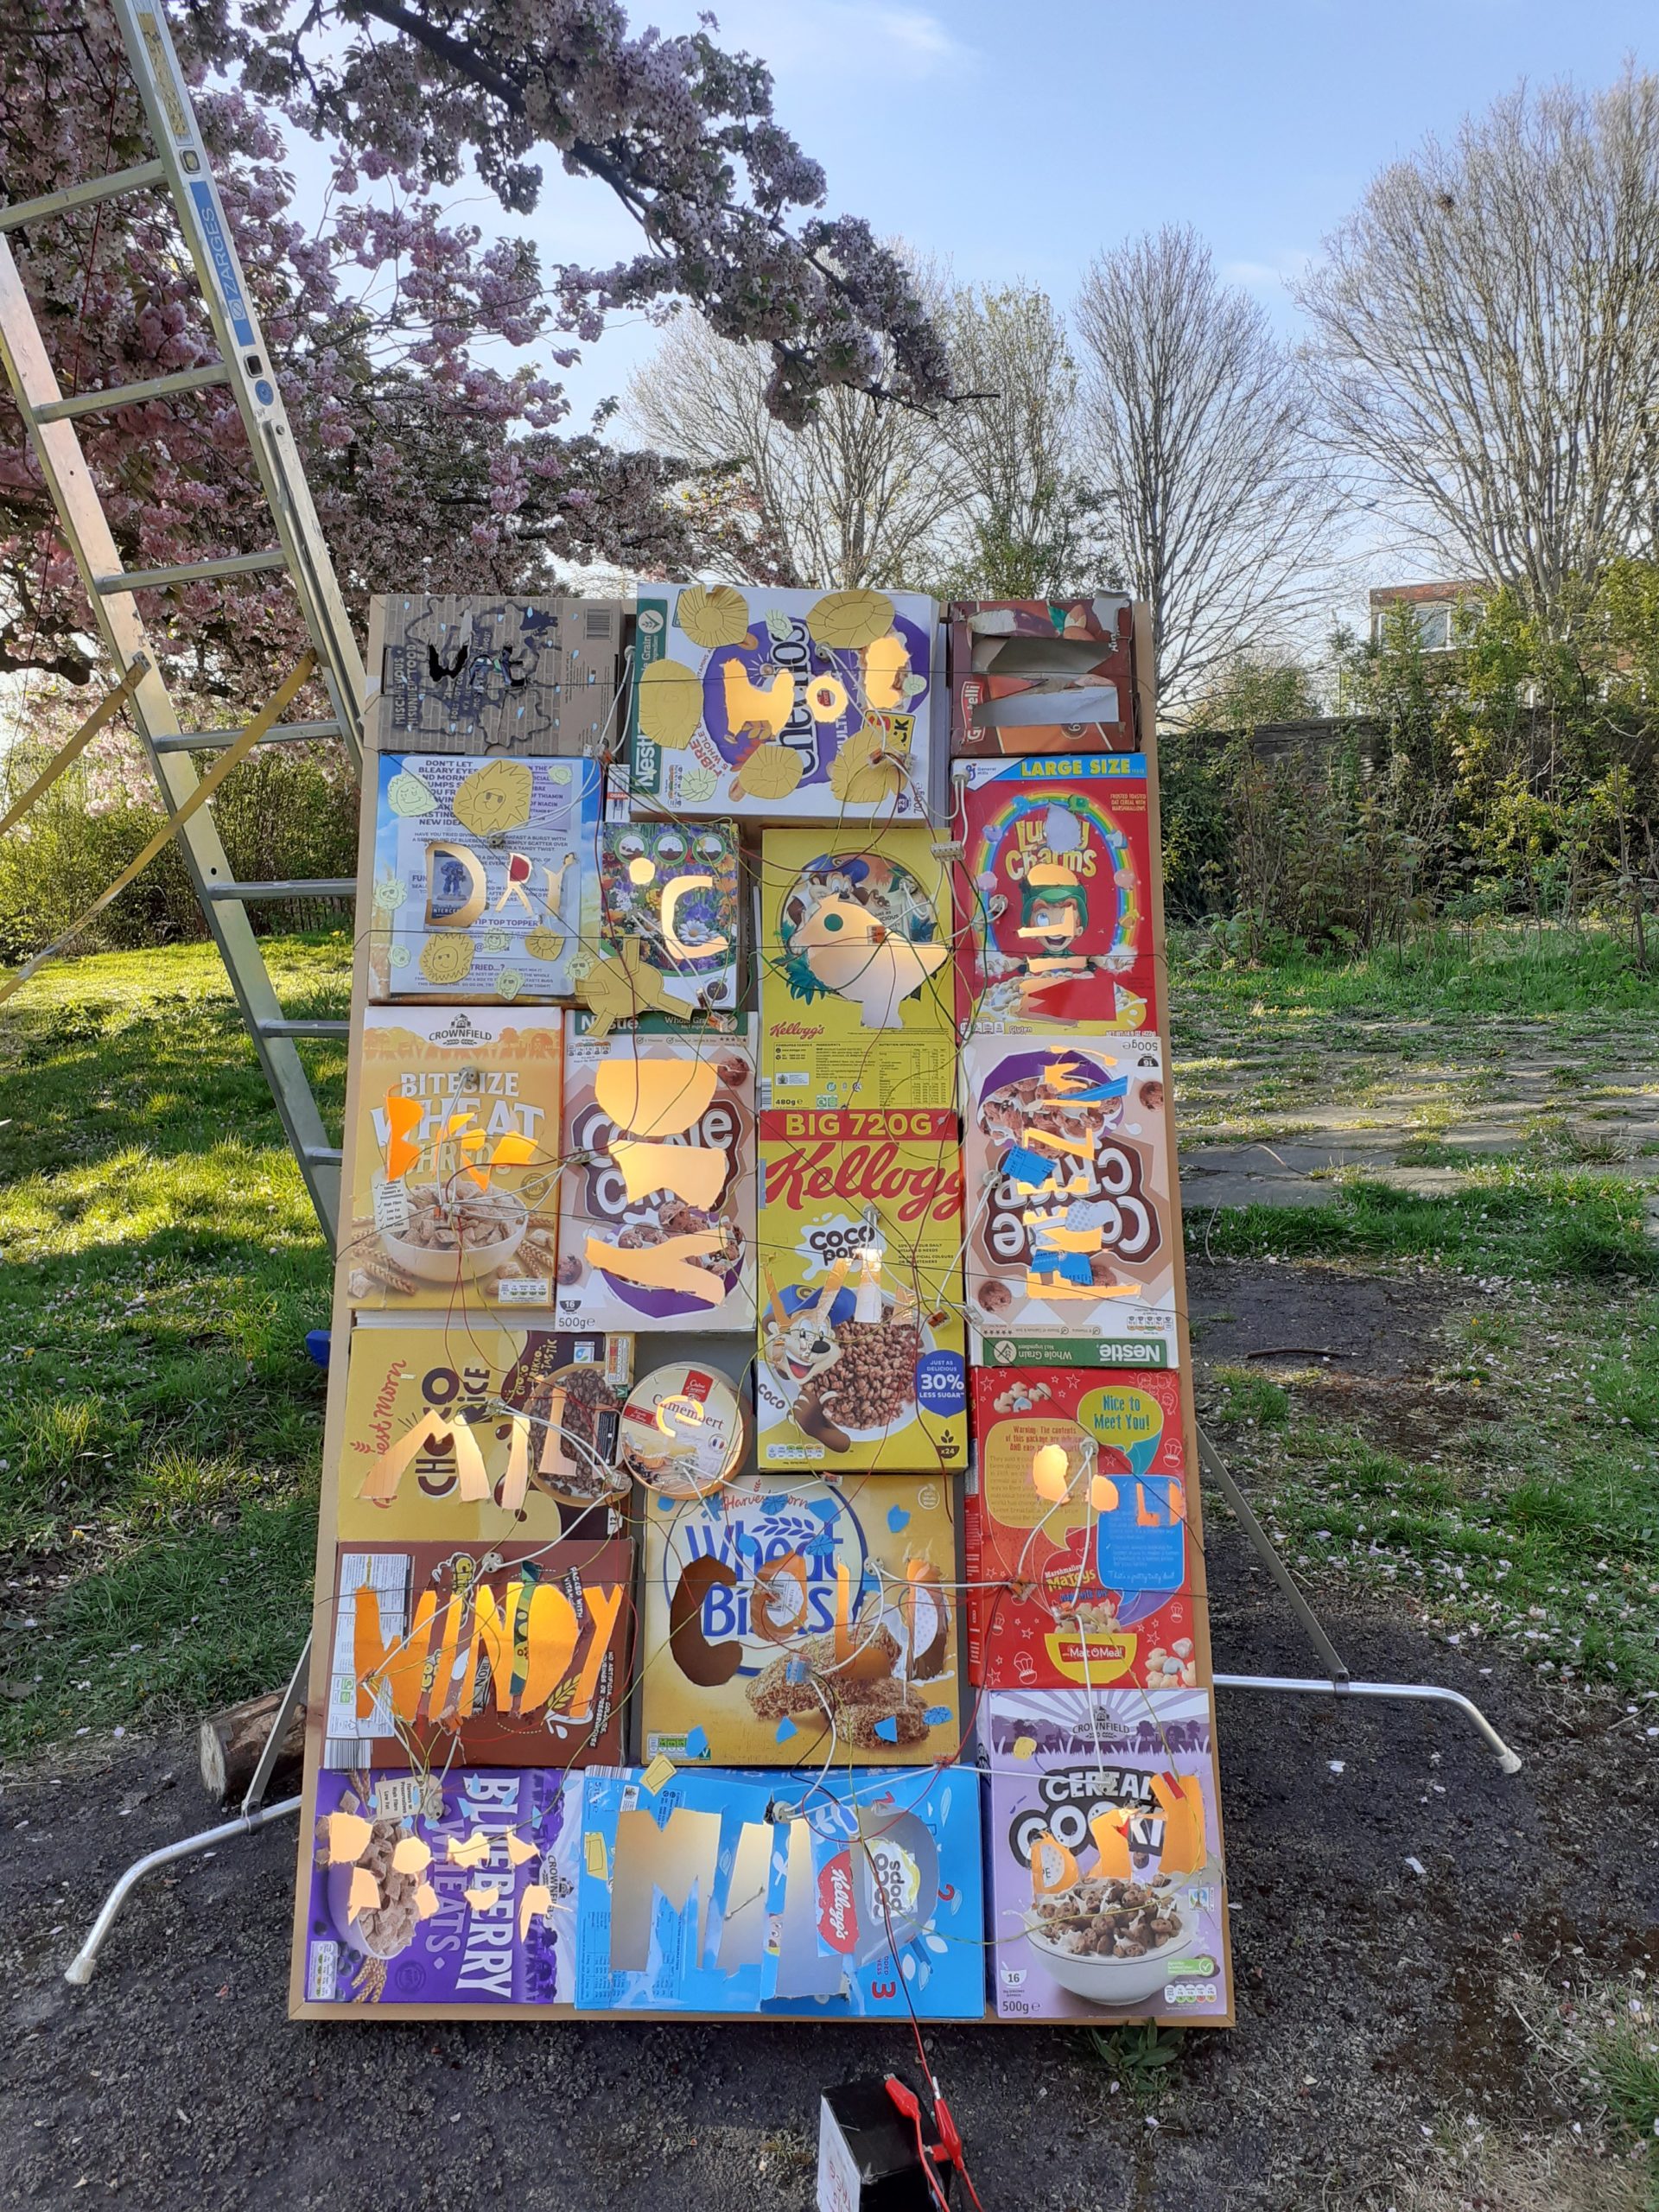 cereal boxes with words for different weather cut out on a board in christ church gardens next to a ladder and a blossom tree